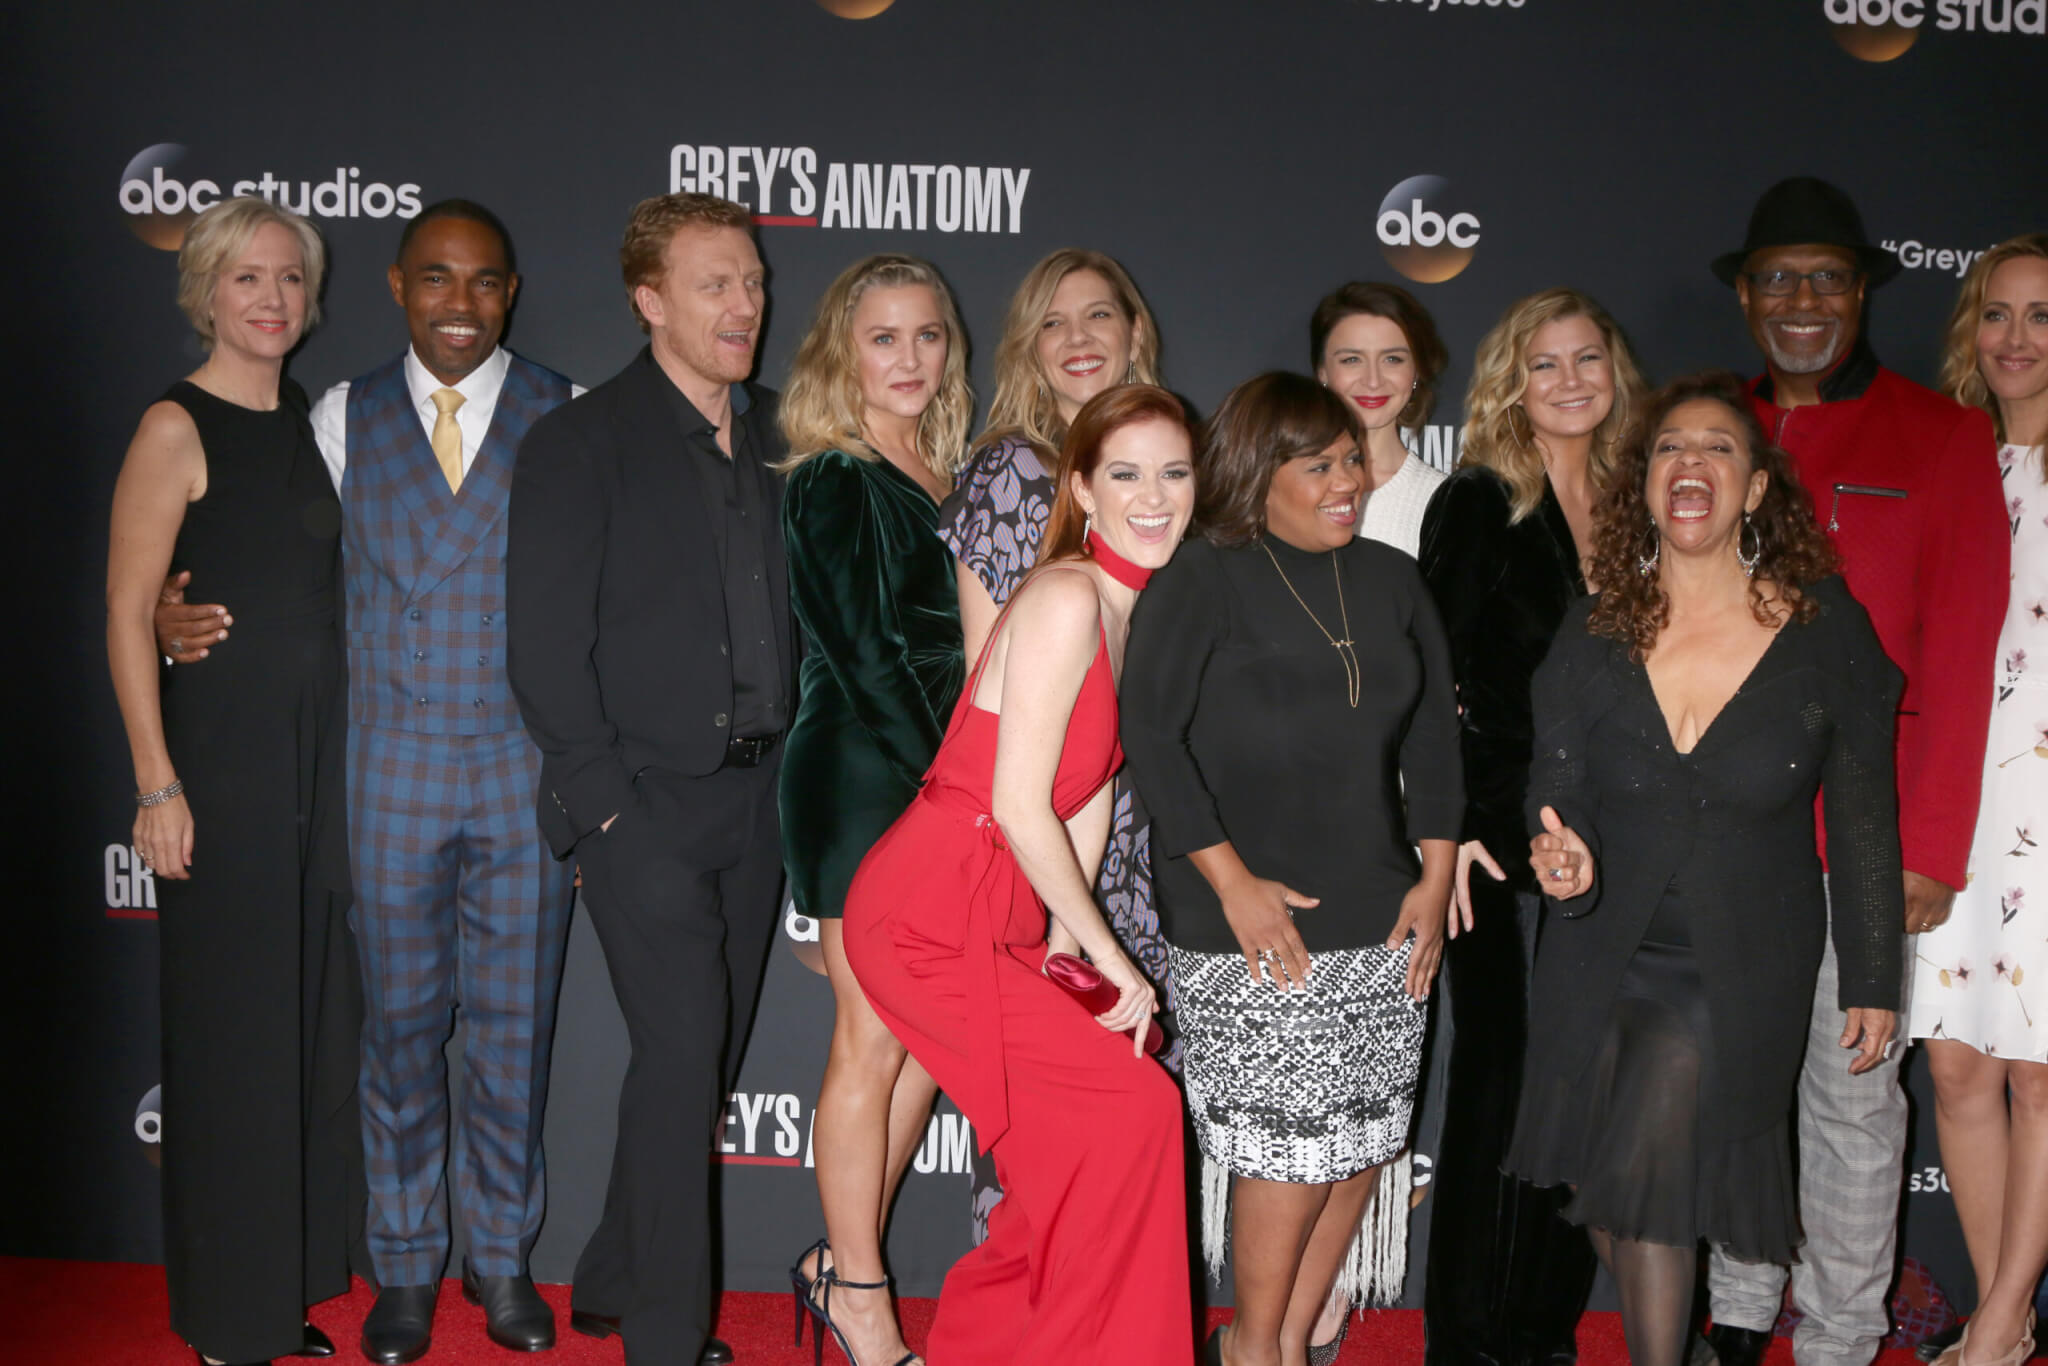 Greys Anatomy Cast at the "Grey's Anatomy" 300th Episode Event in 2017